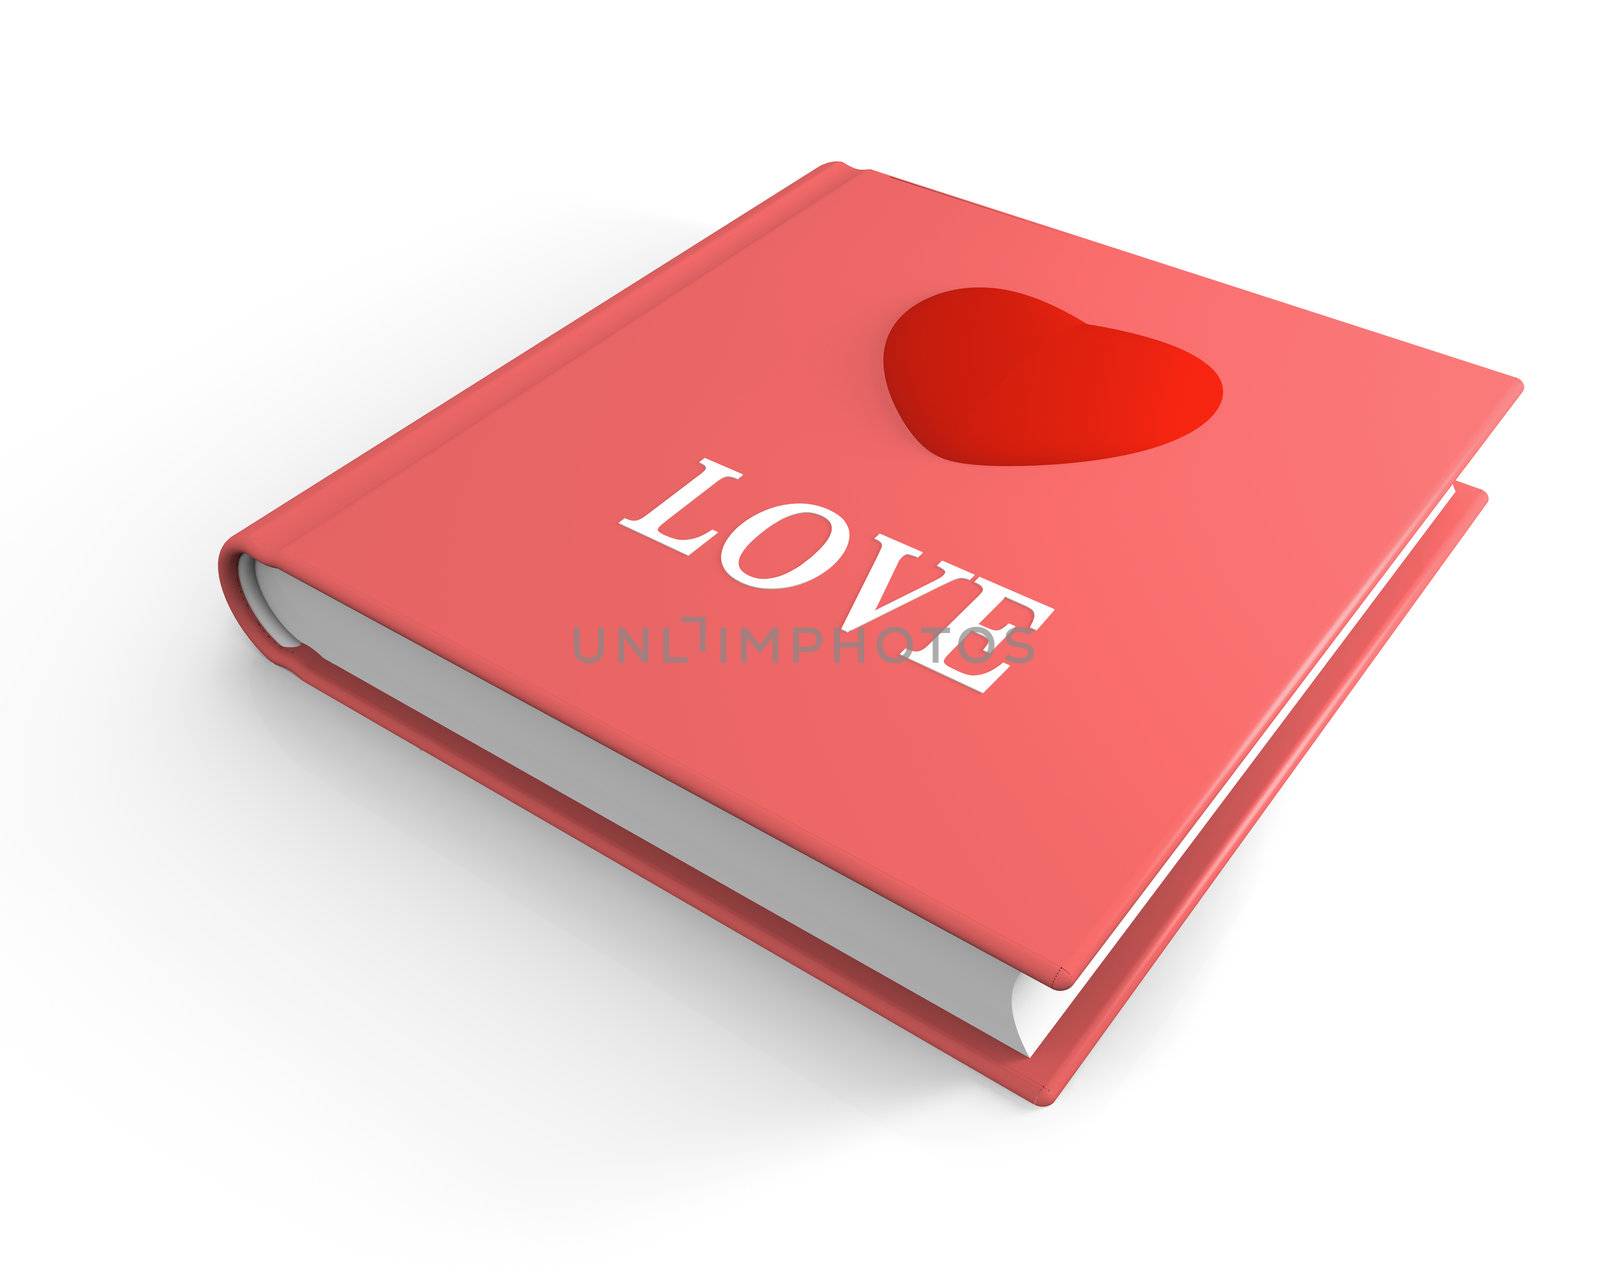 Book of love by Harvepino